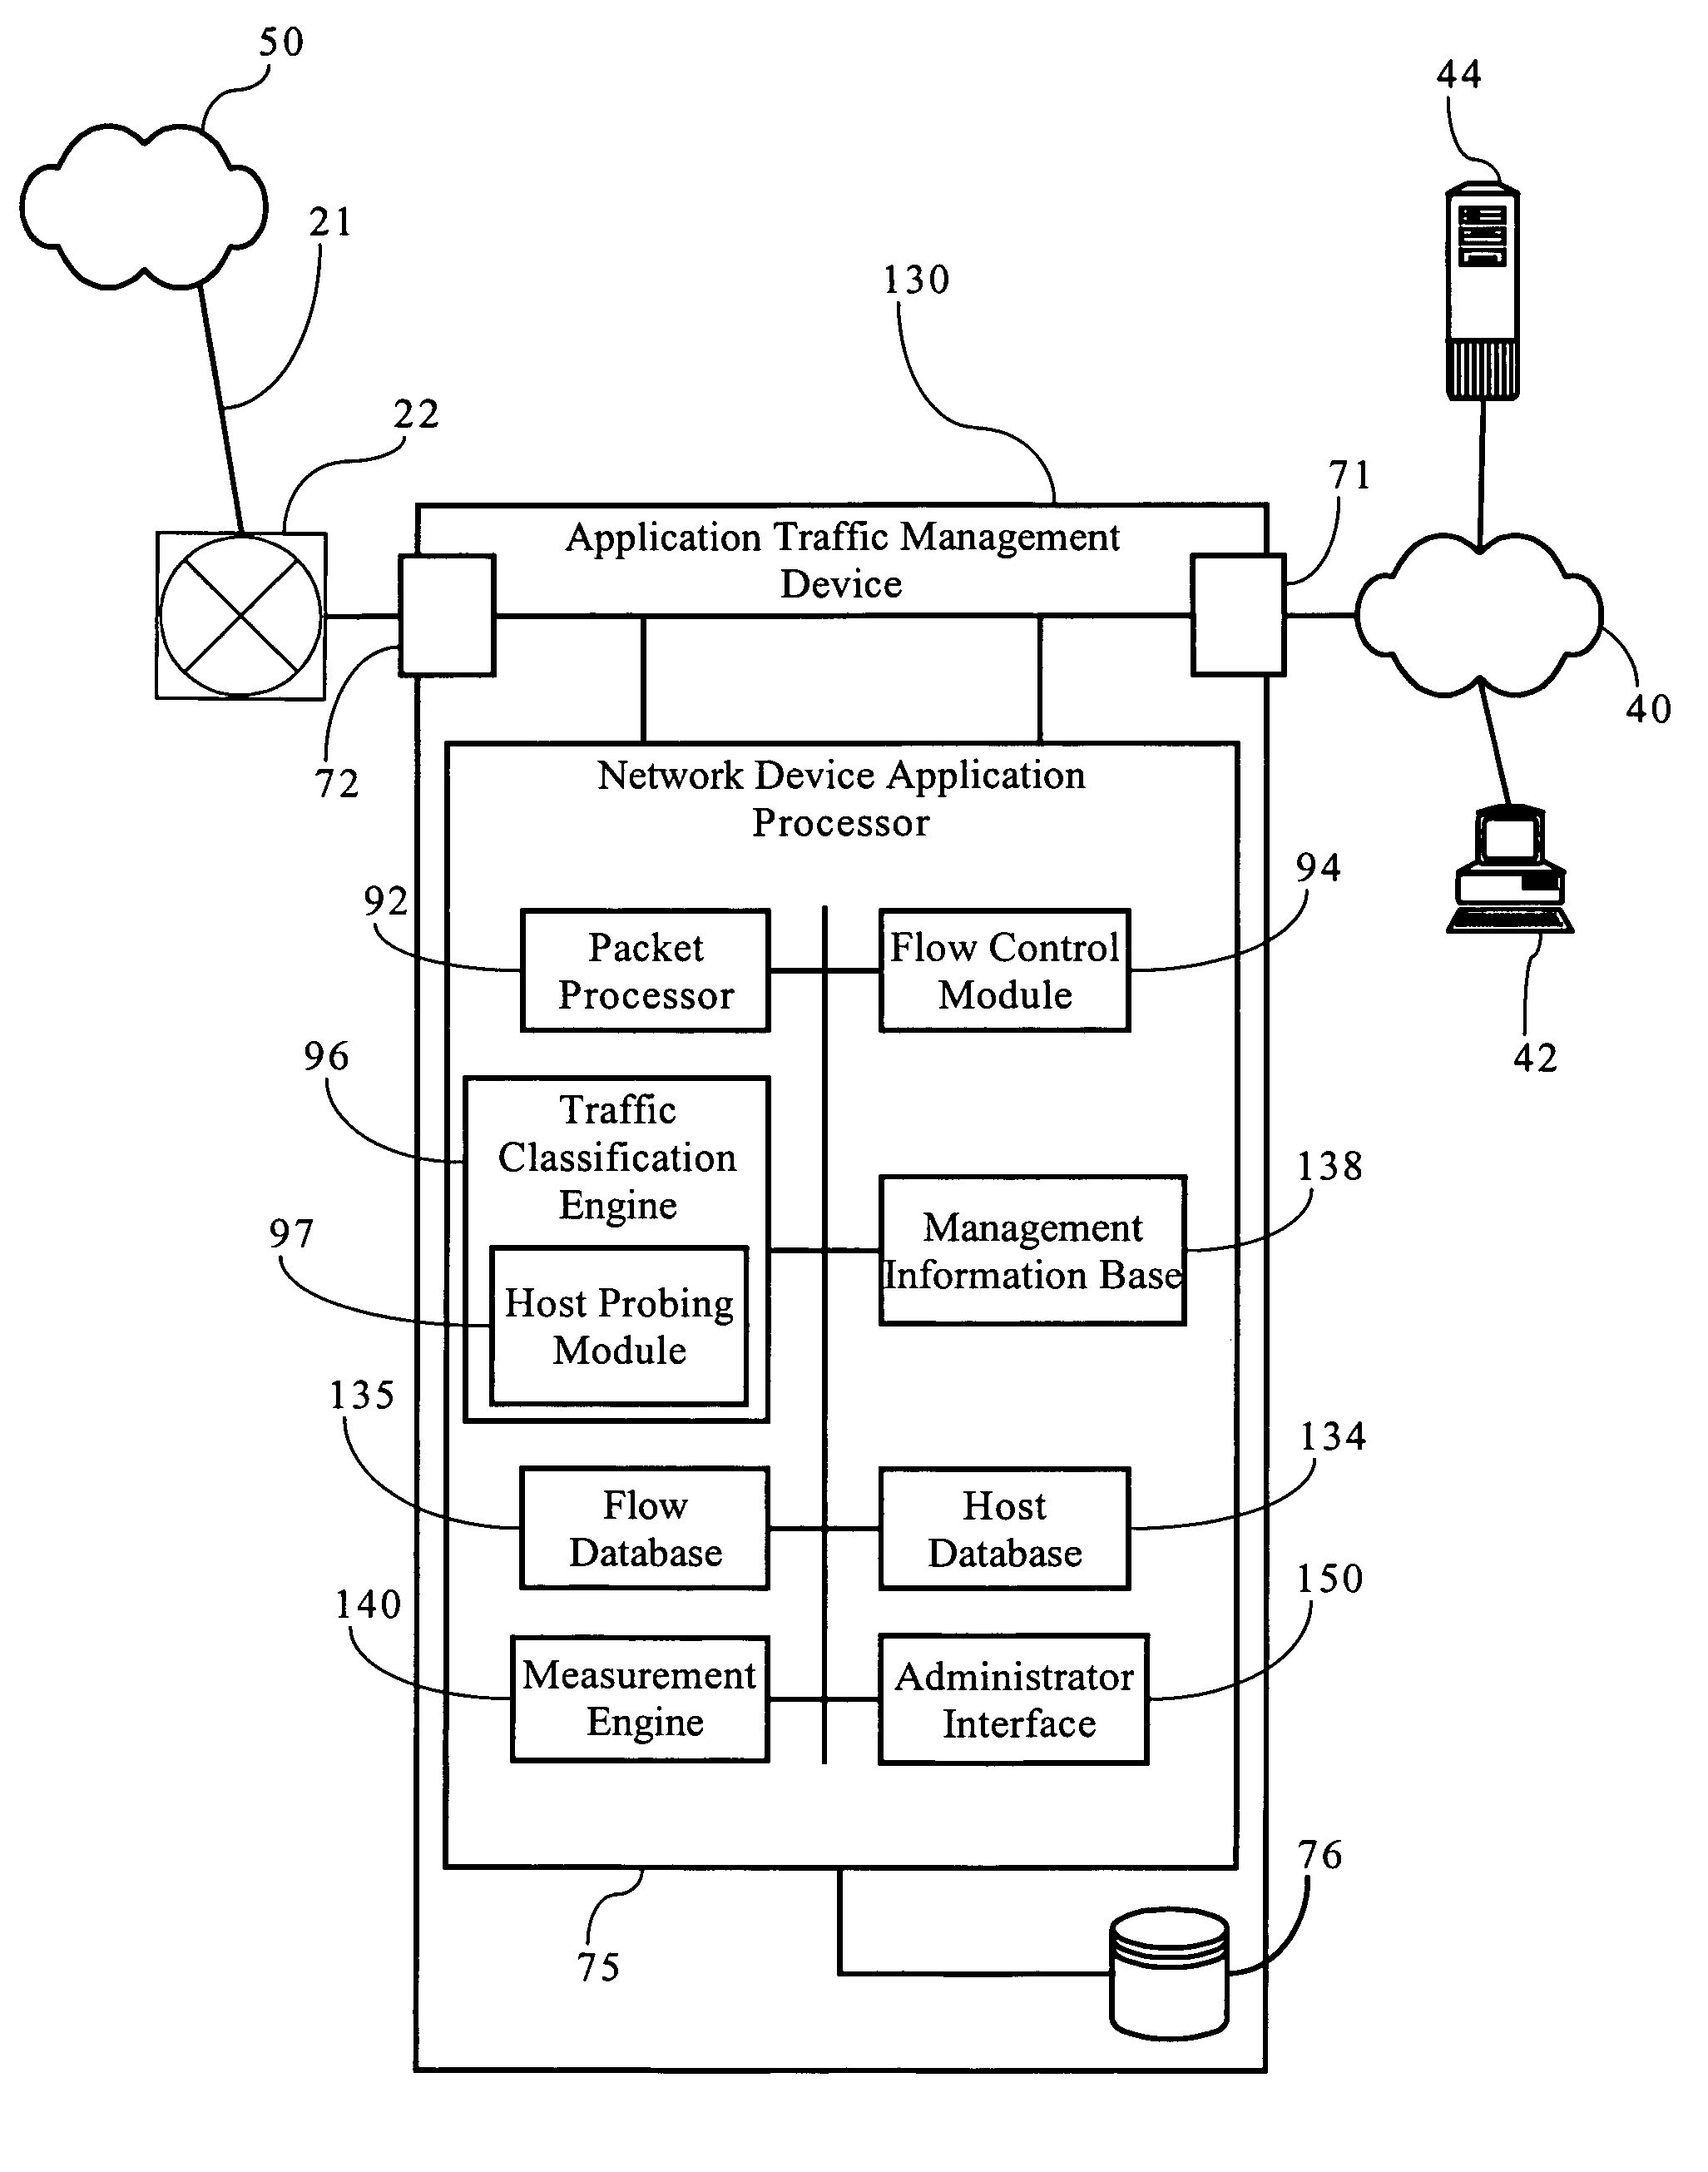 Probing hosts against network application profiles to facilitate classification of network traffic